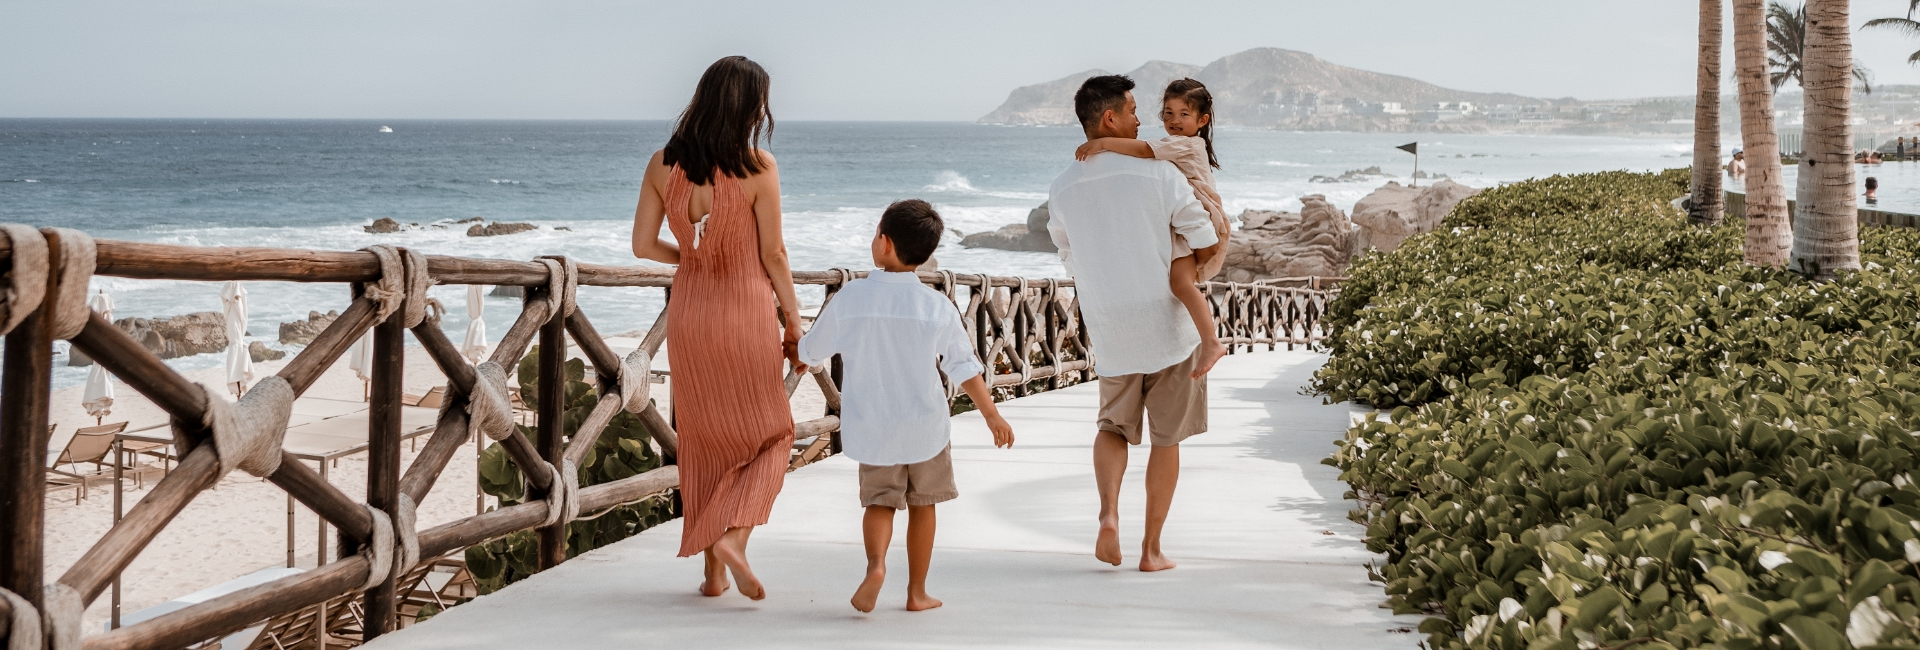 Labor Day package at Grand Velas Los Cabos, Mexico